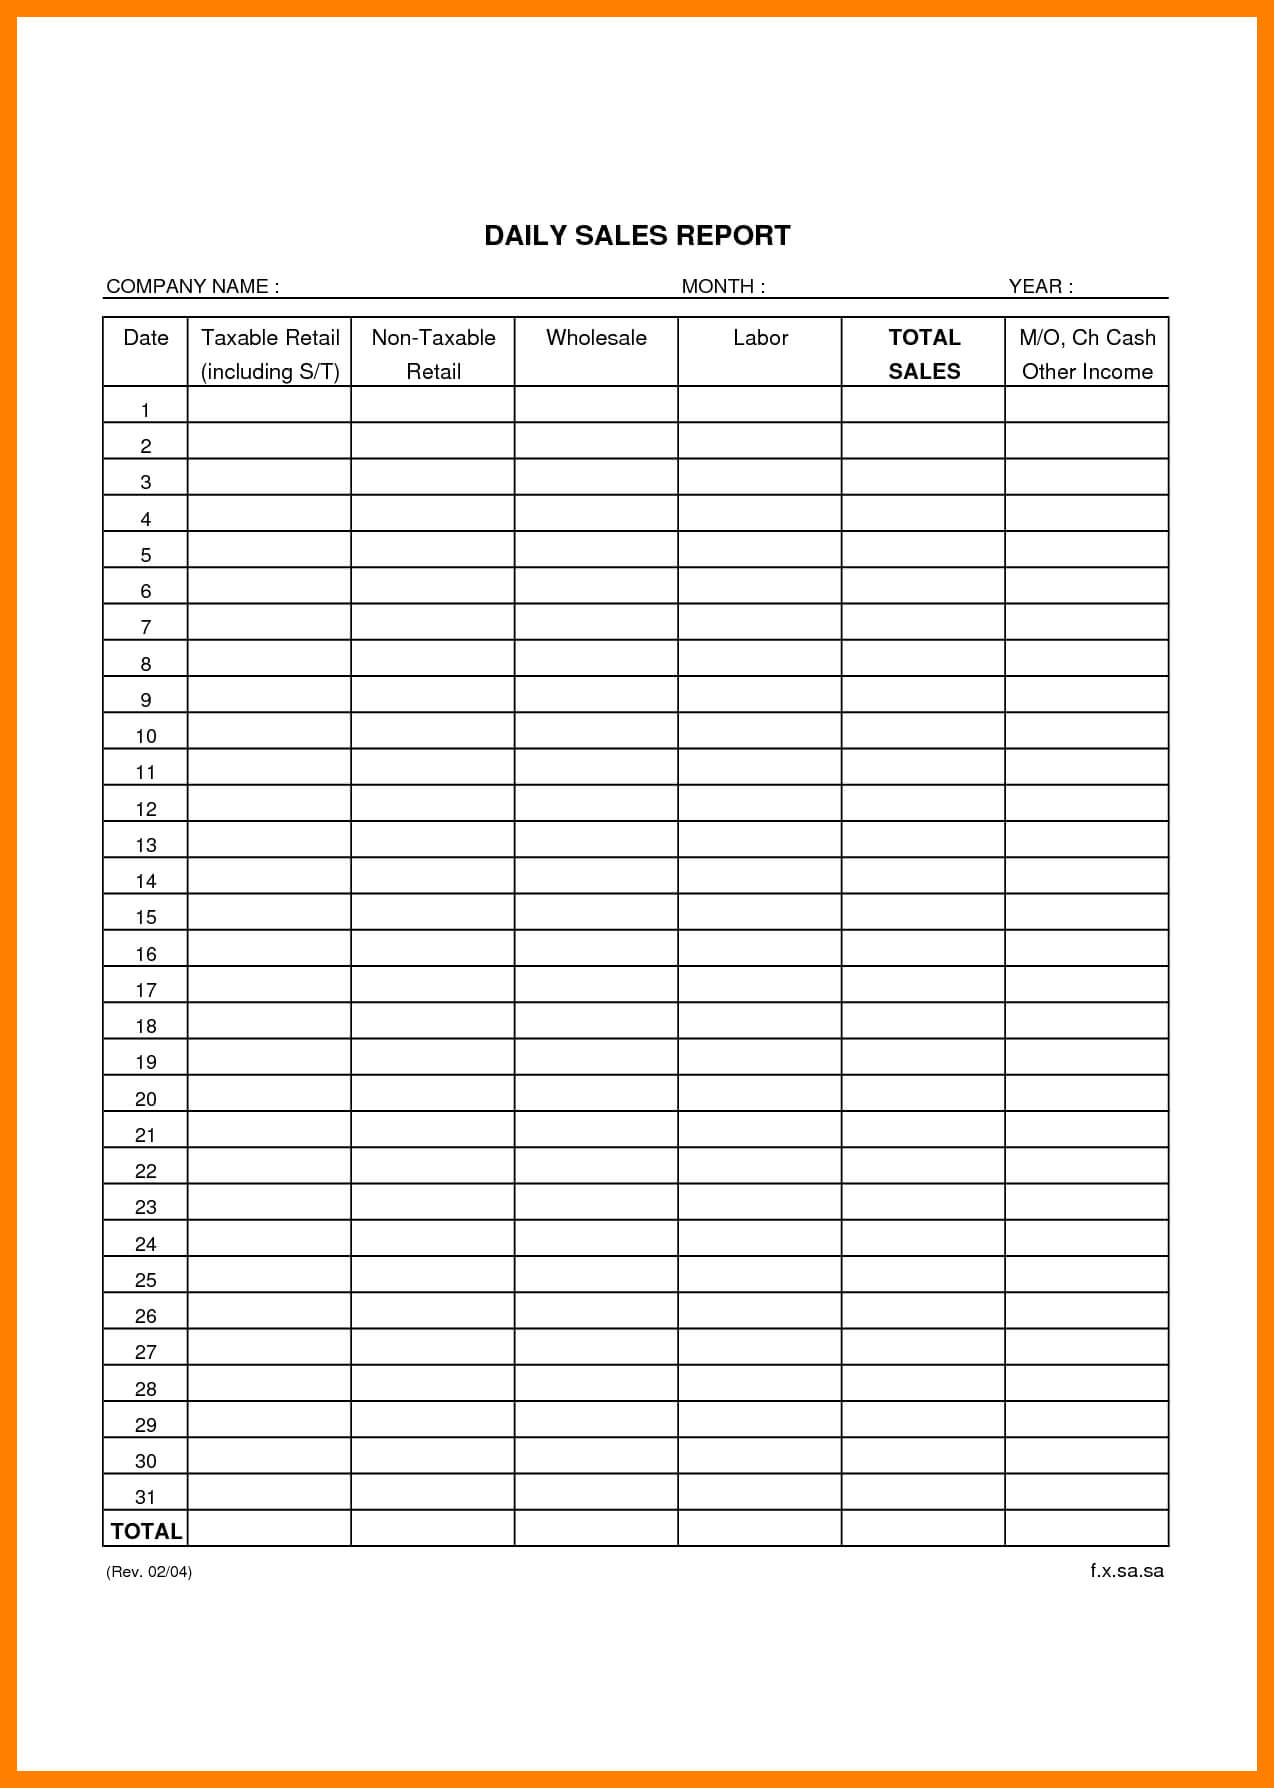 Excel Sales Report Template Free Download – Atlantaauctionco With Daily Sales Report Template Excel Free